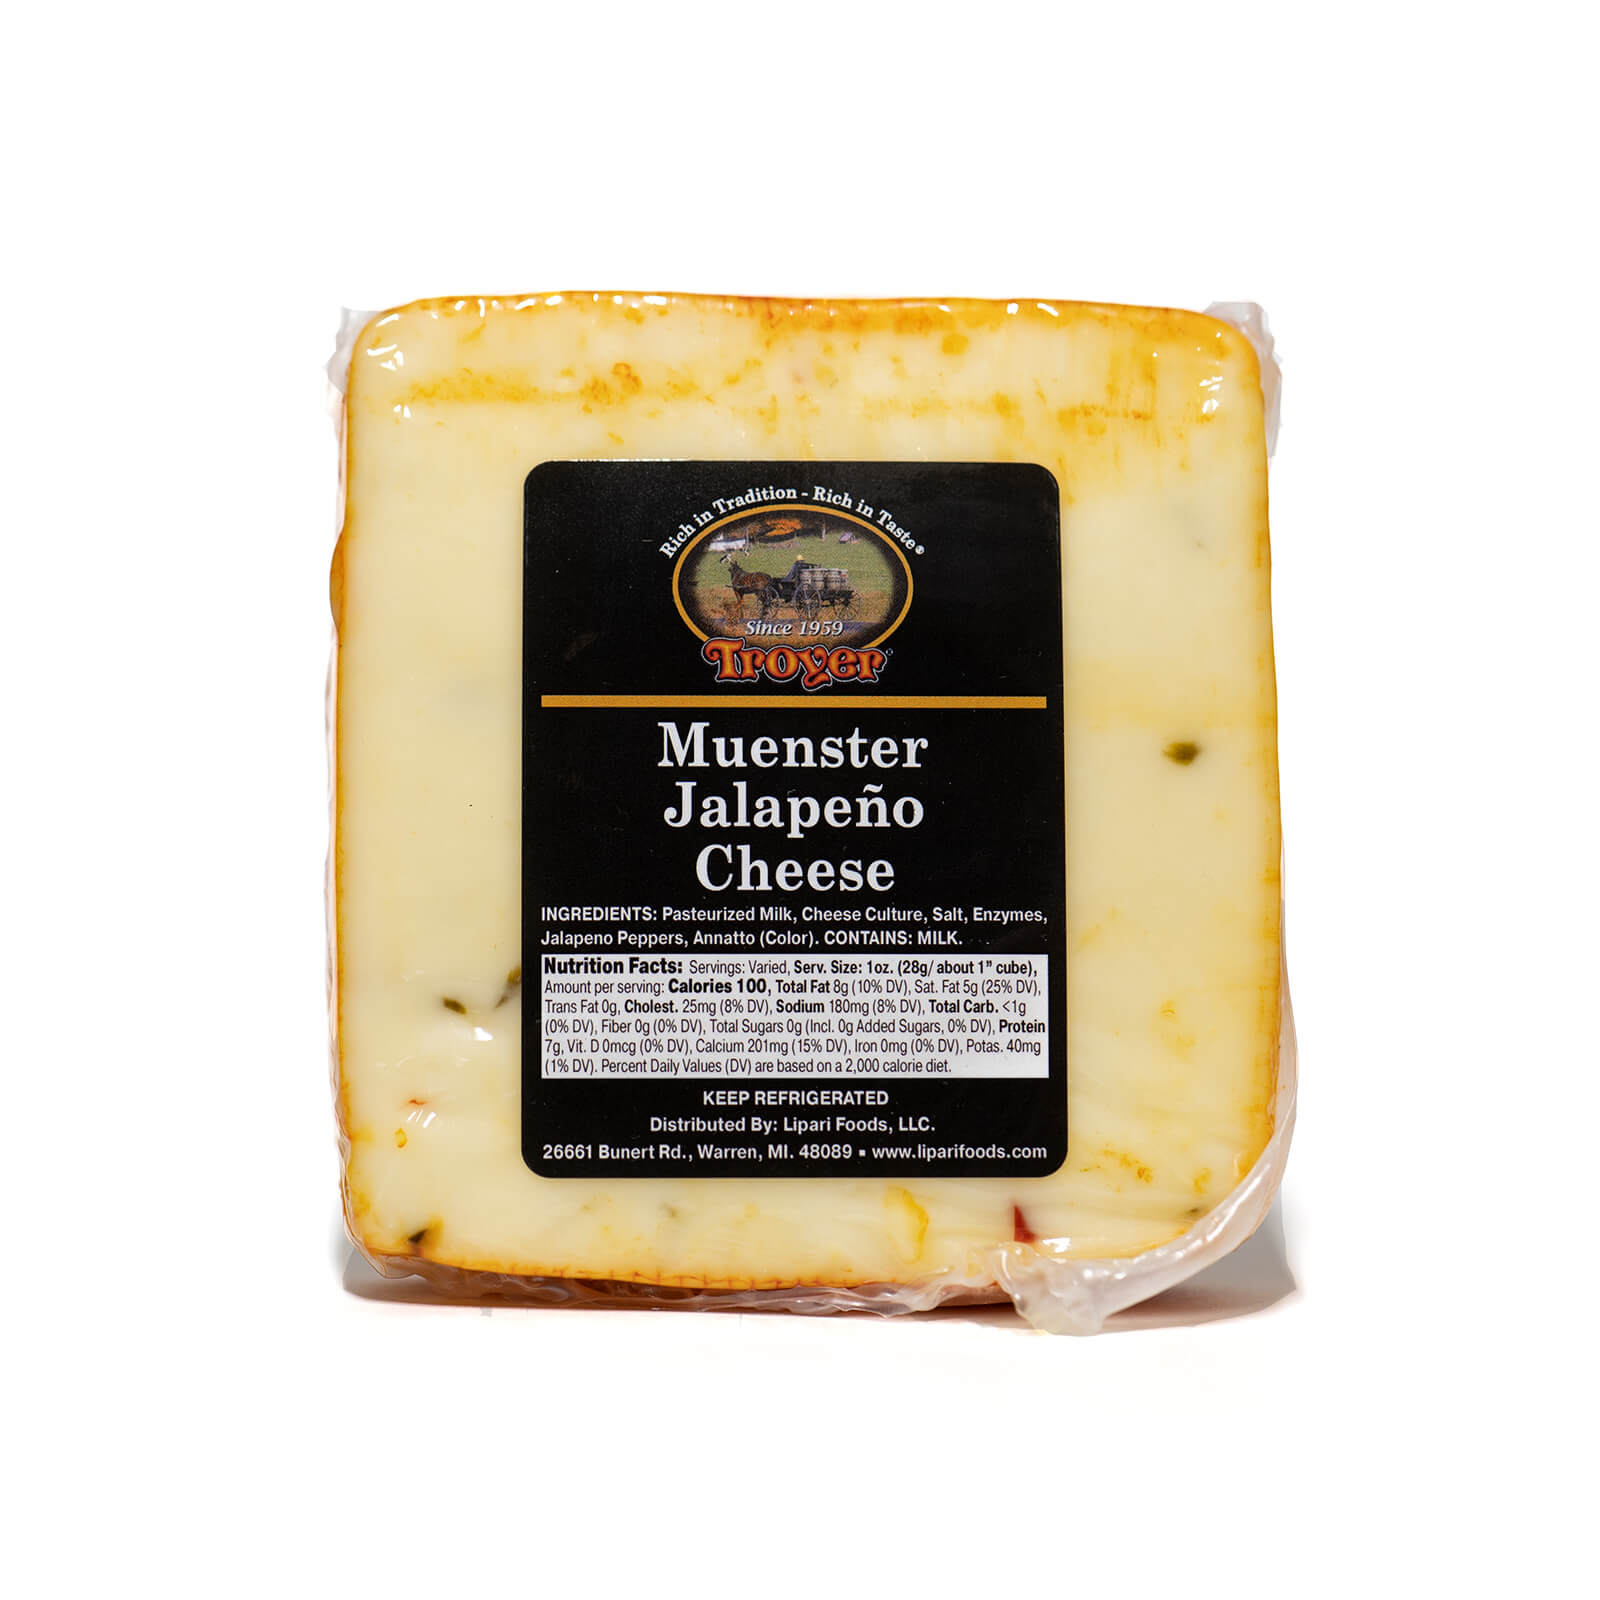 Muenster Jalapeno Cheese - Troyer w/ Nutrition Facts